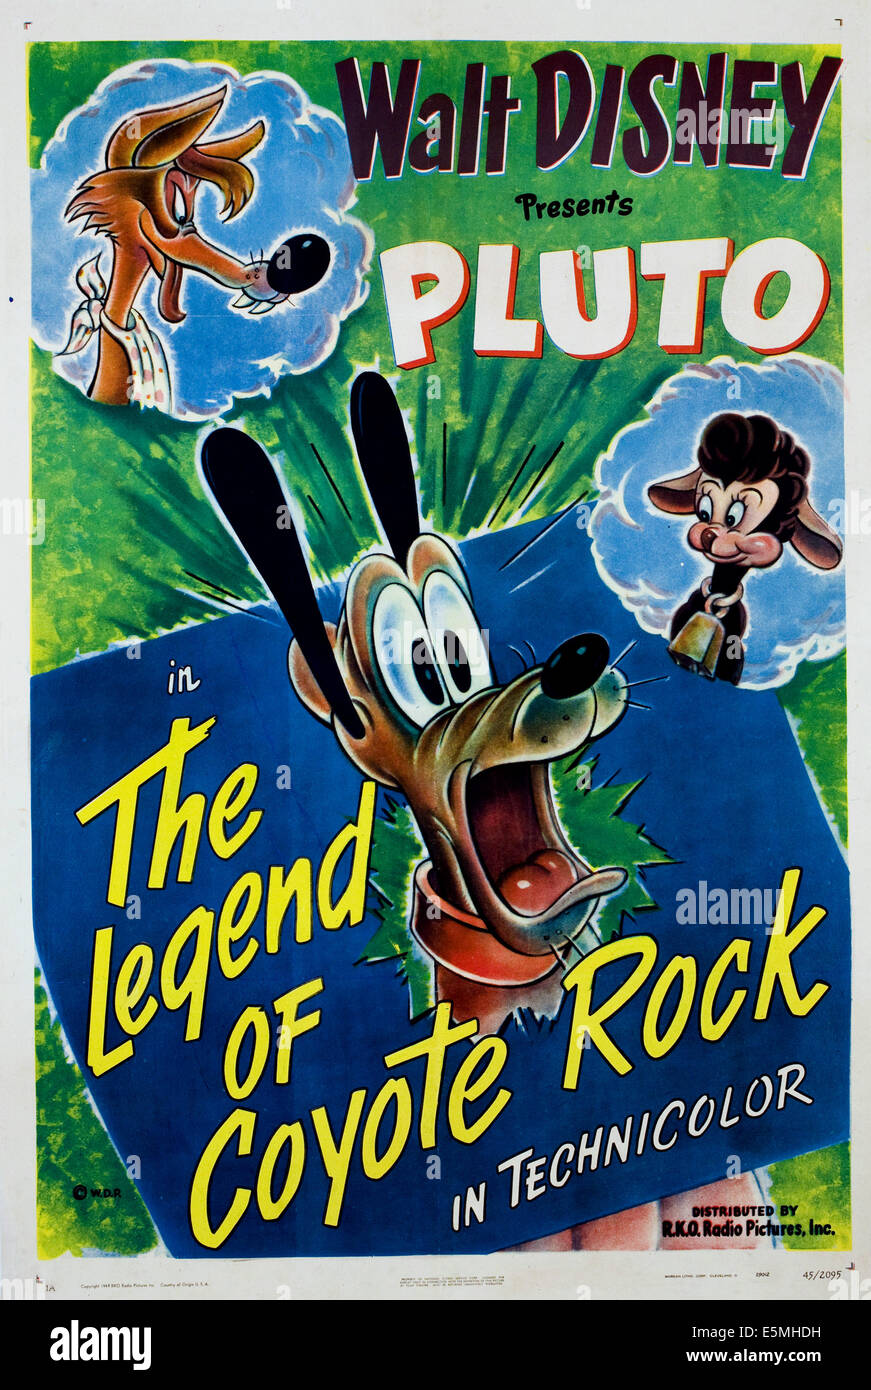 THE LEGEND OF COYOTE ROCK, Pluto, 1945. Stock Photo